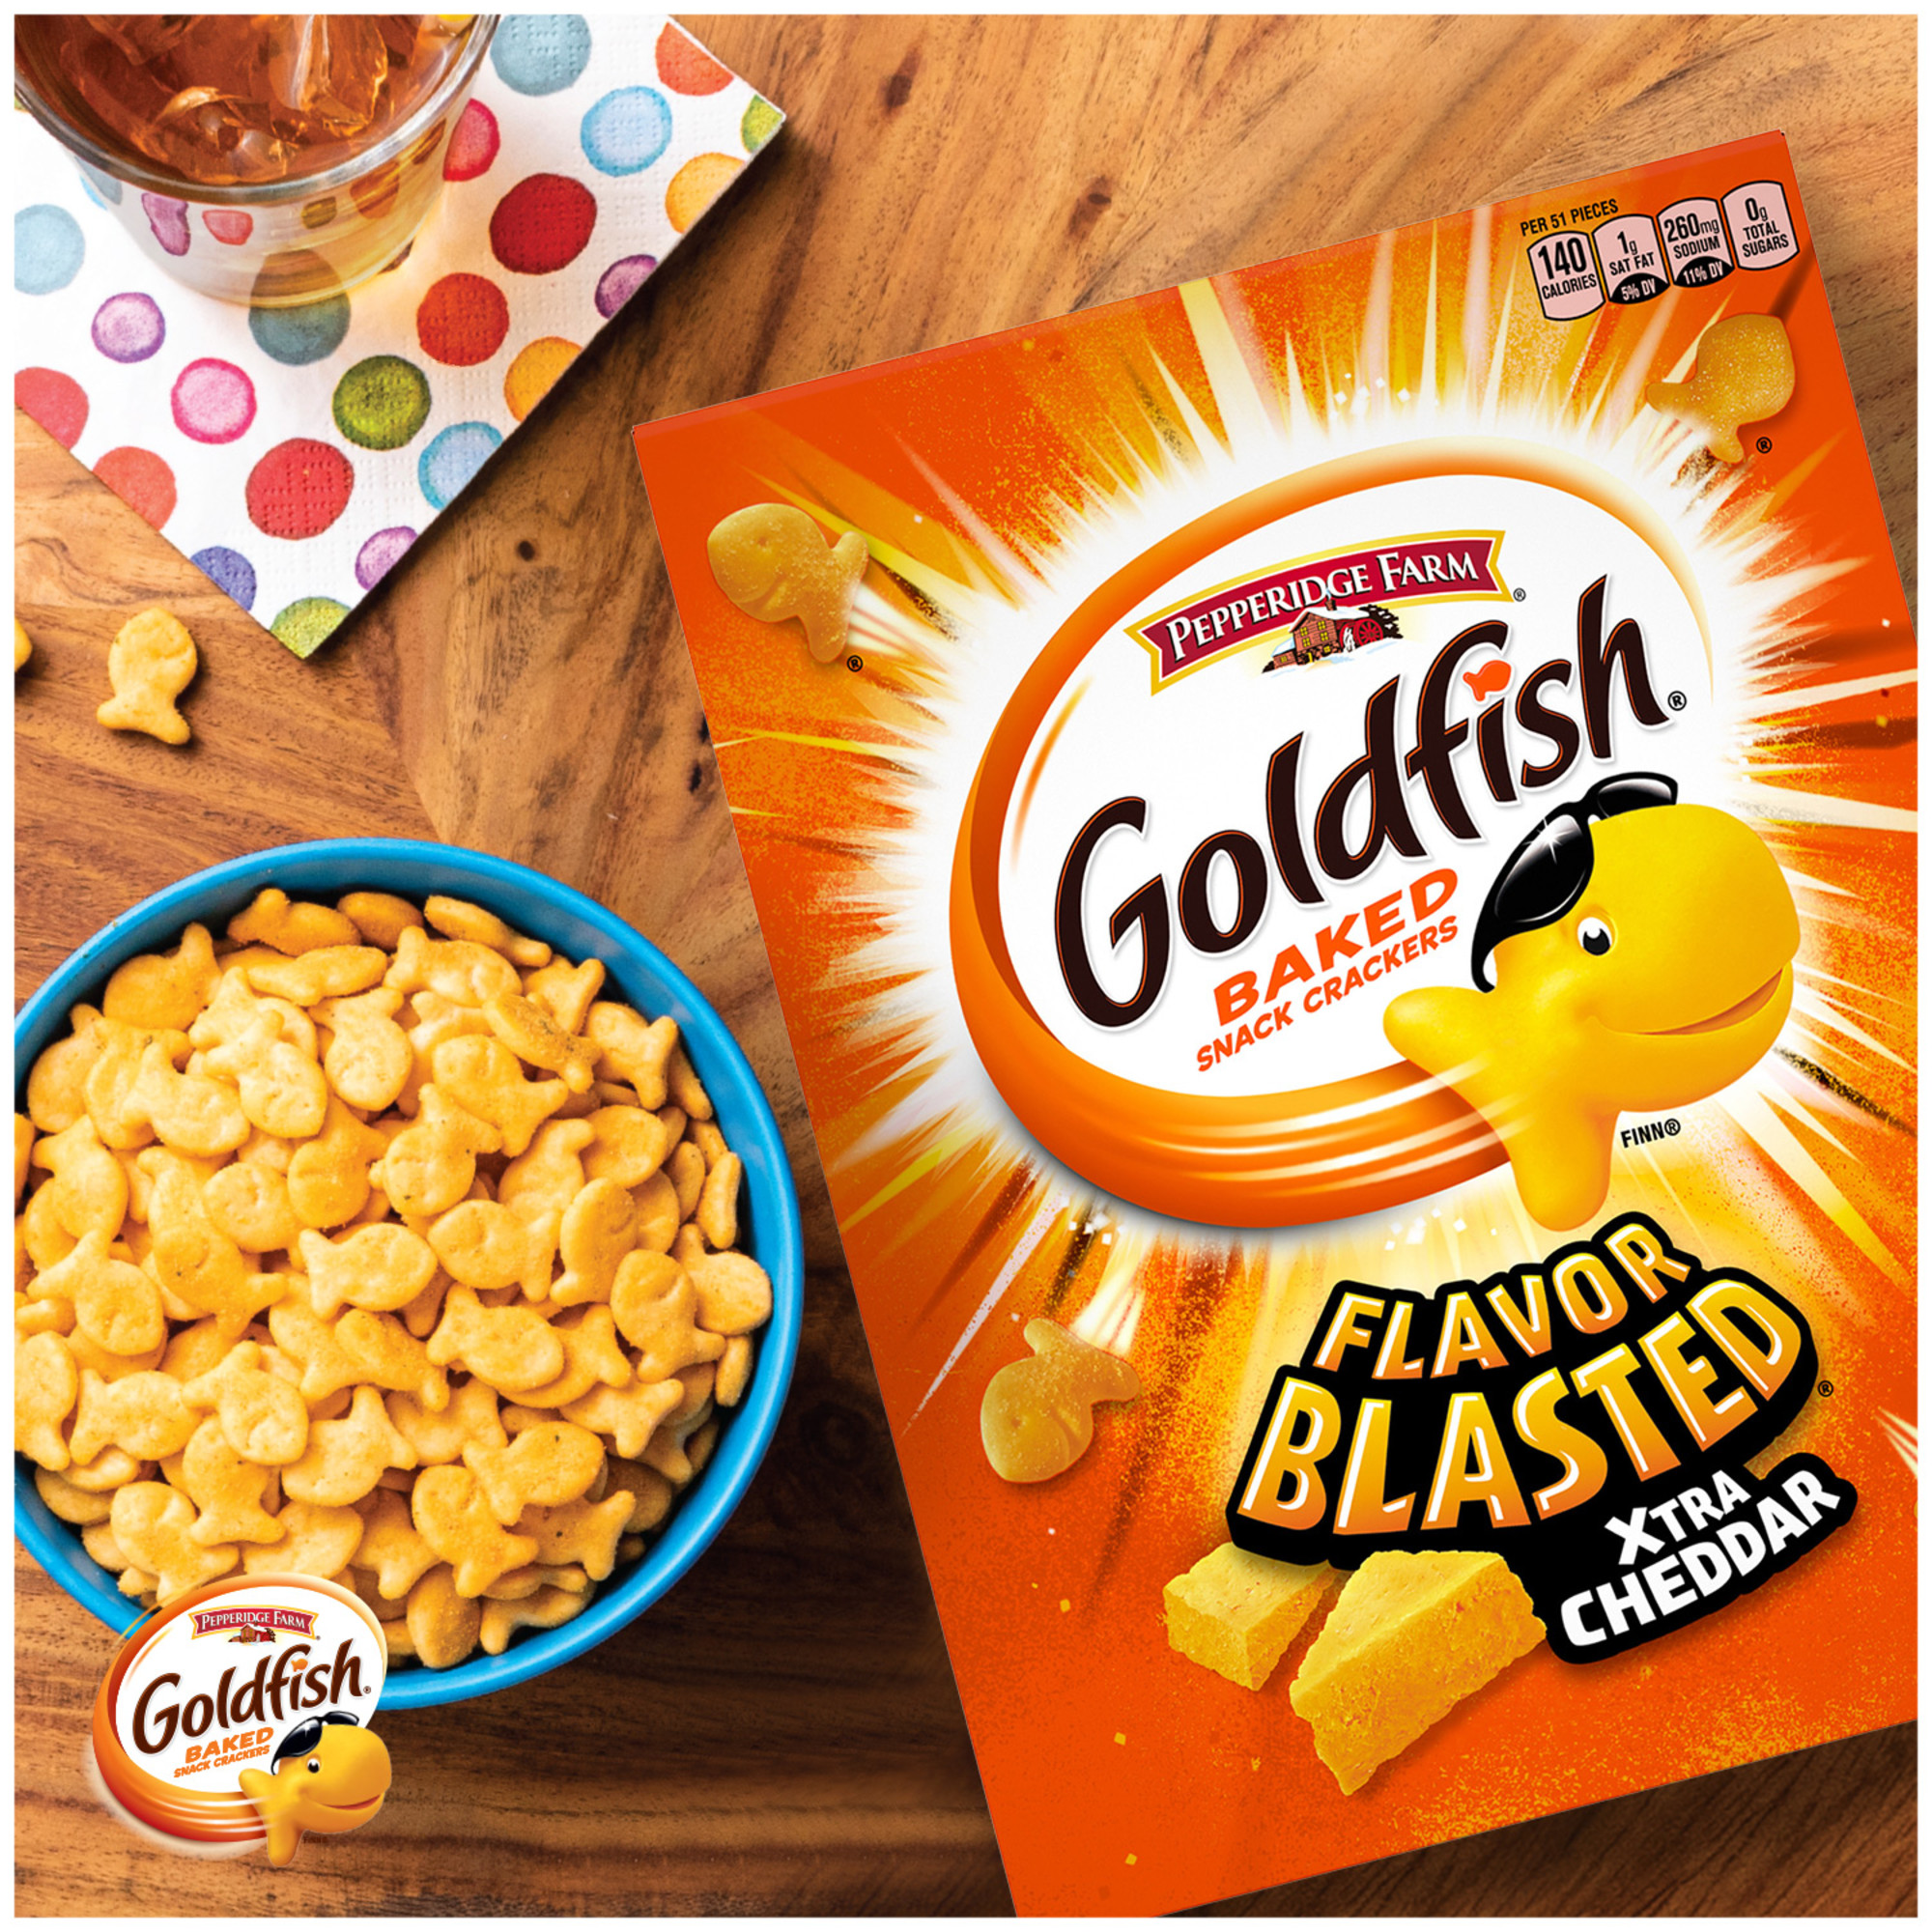 Goldfish Flavor Blasted Xtra Cheddar Snack Crackers, 10 oz box - image 4 of 12